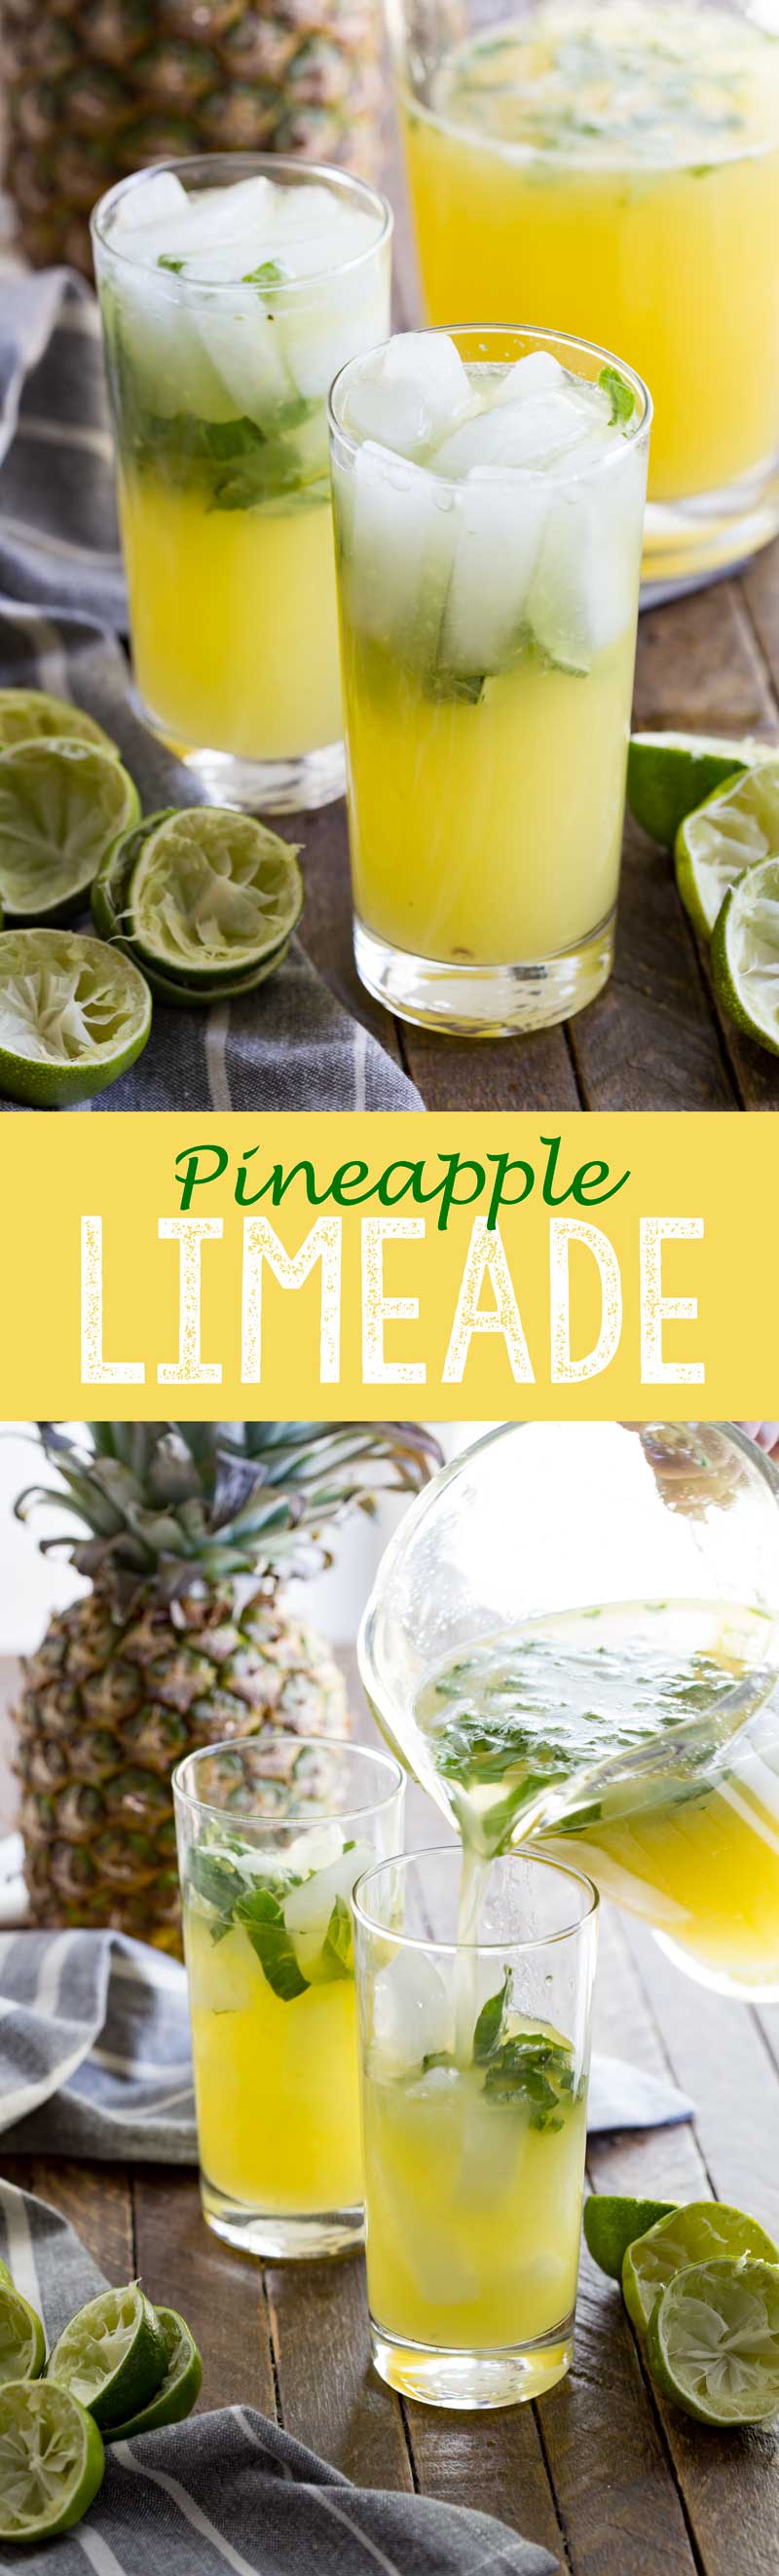 Cool refreshing pineapple limeade, the perfect combination of flavors for a summery drink